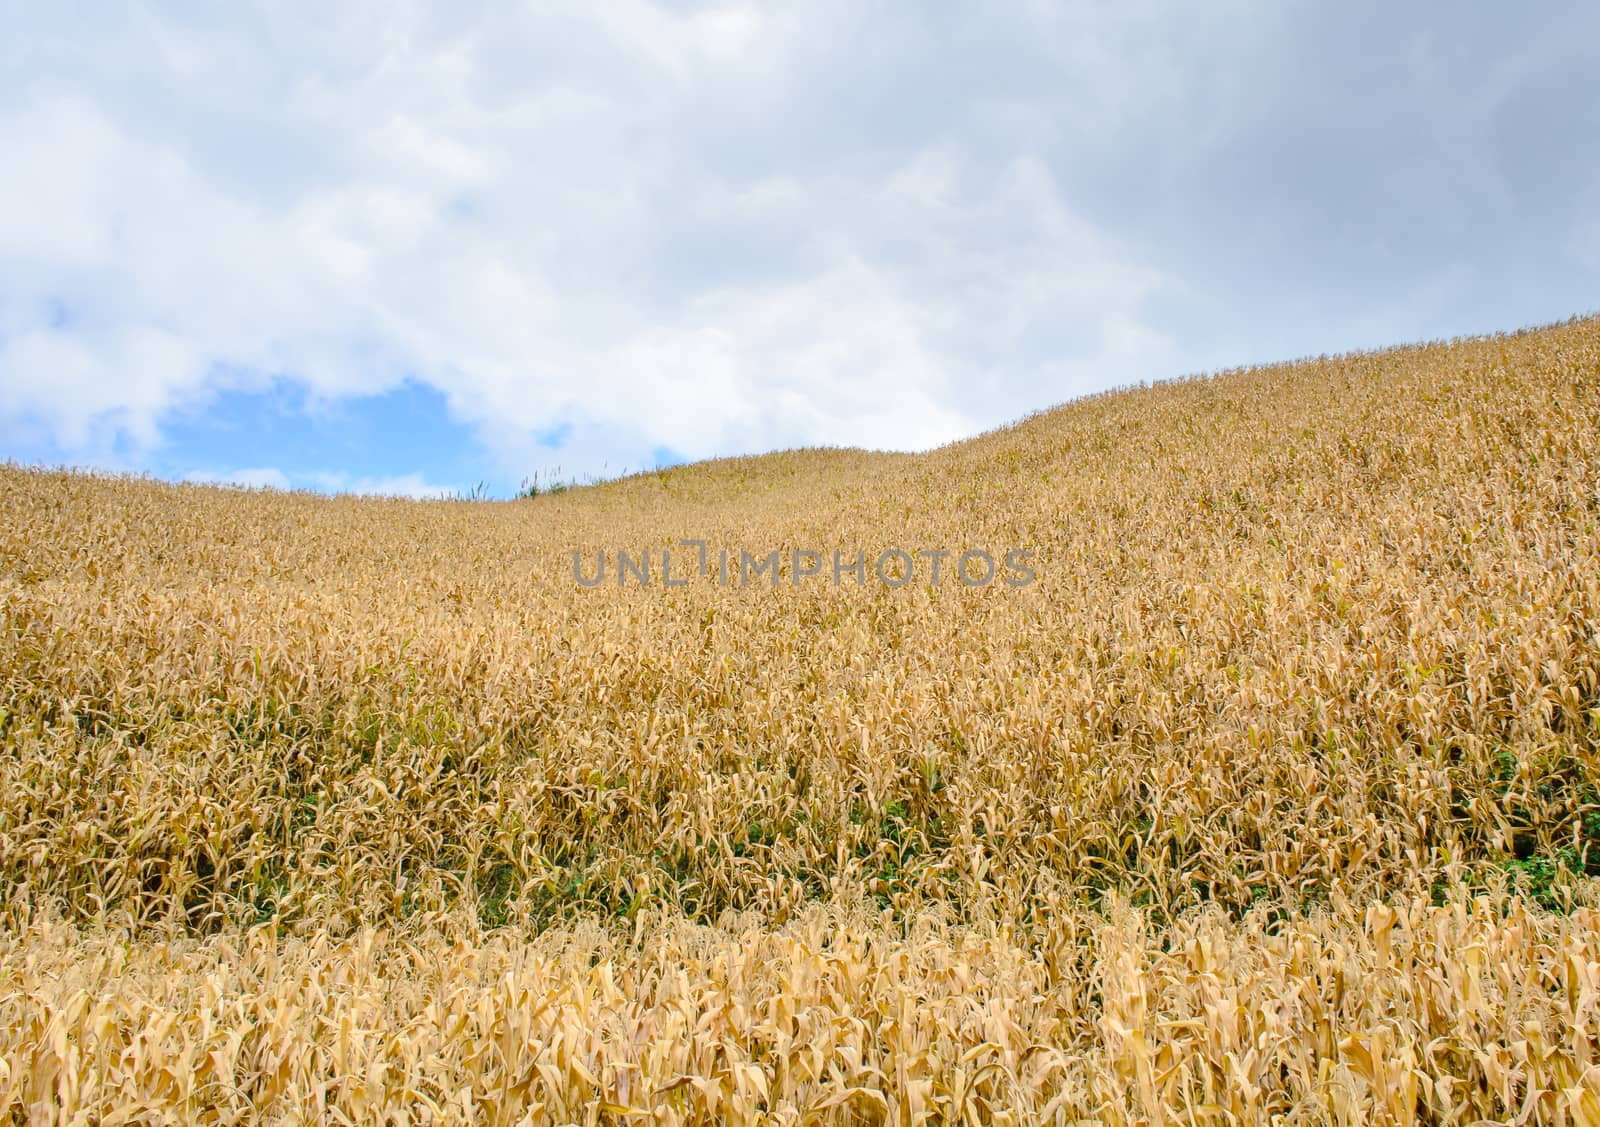 The Corn Field is on the Hill with cloudy blue sky.